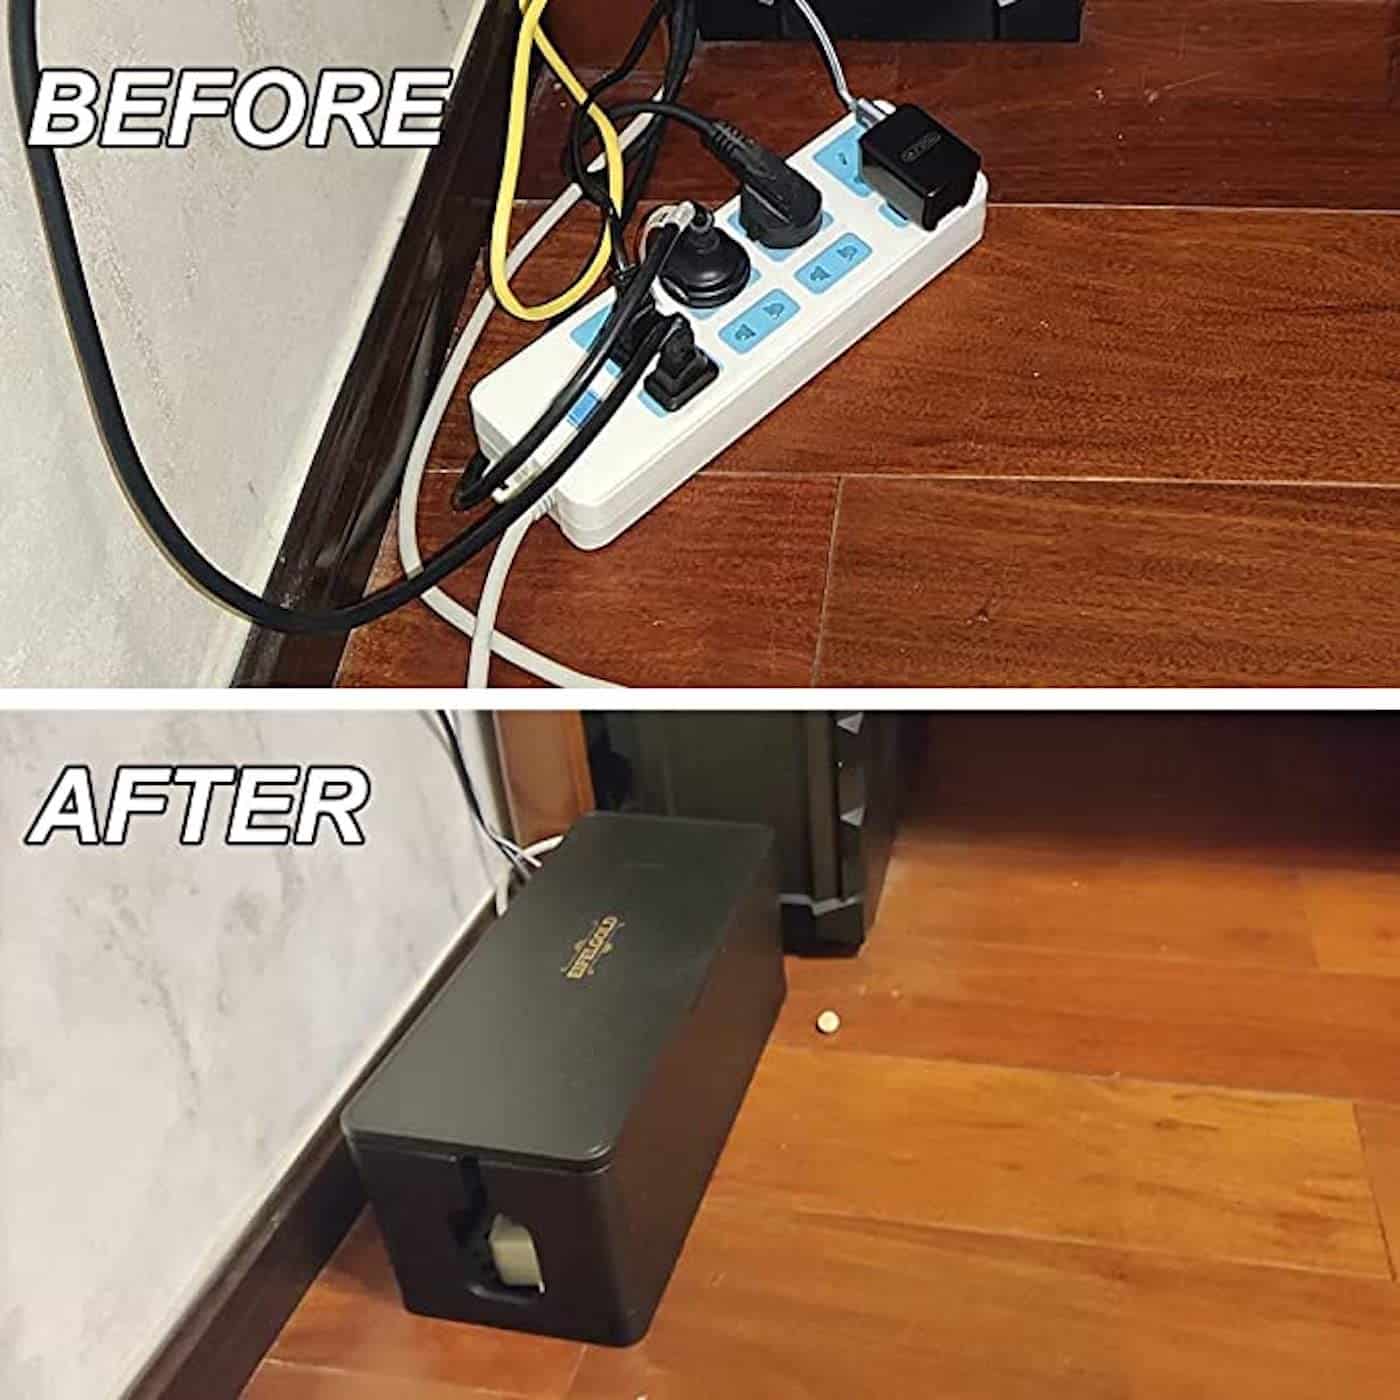 Before and after pictures with one showing electrical cords on a surge protector on a wood floor, and one photo with cords housed inside a rectangular cable storage box
